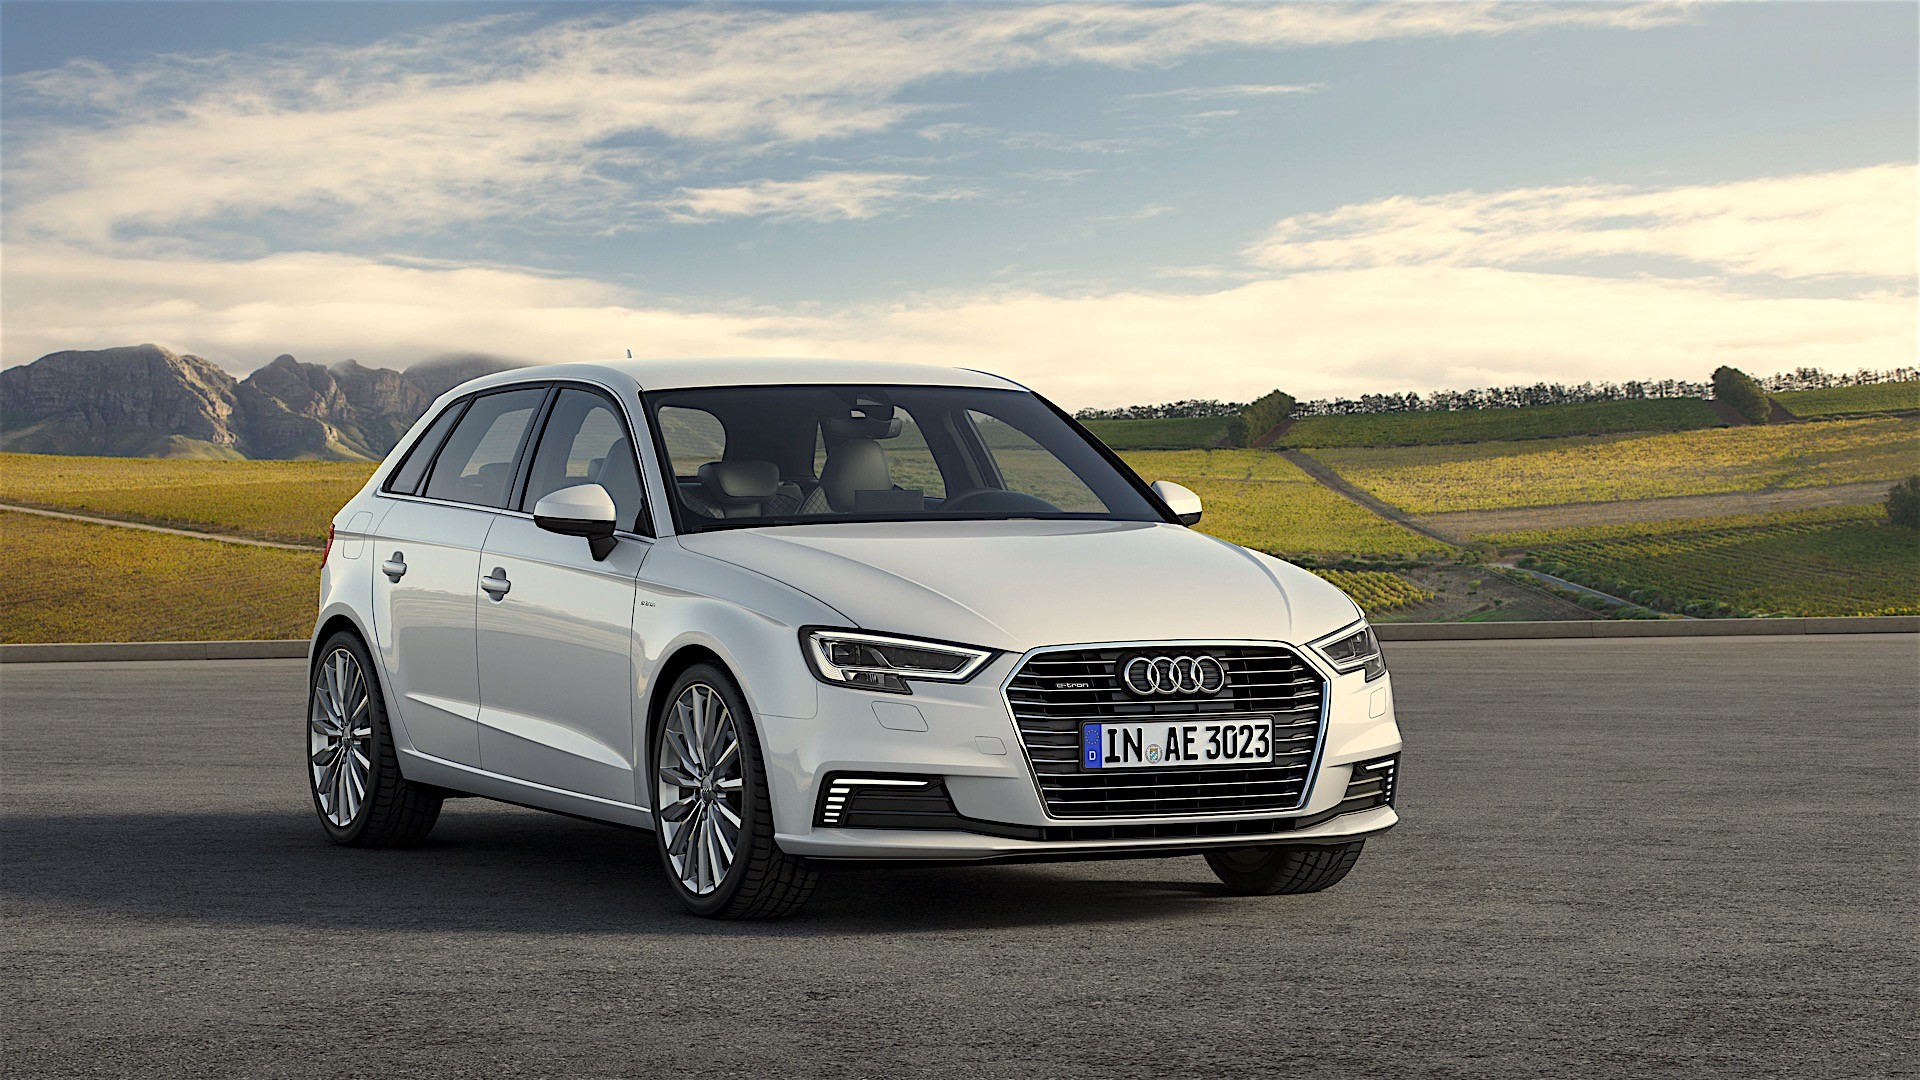 2017 Audi A3 Facelift Configurator Launched in Germany S3 Not 